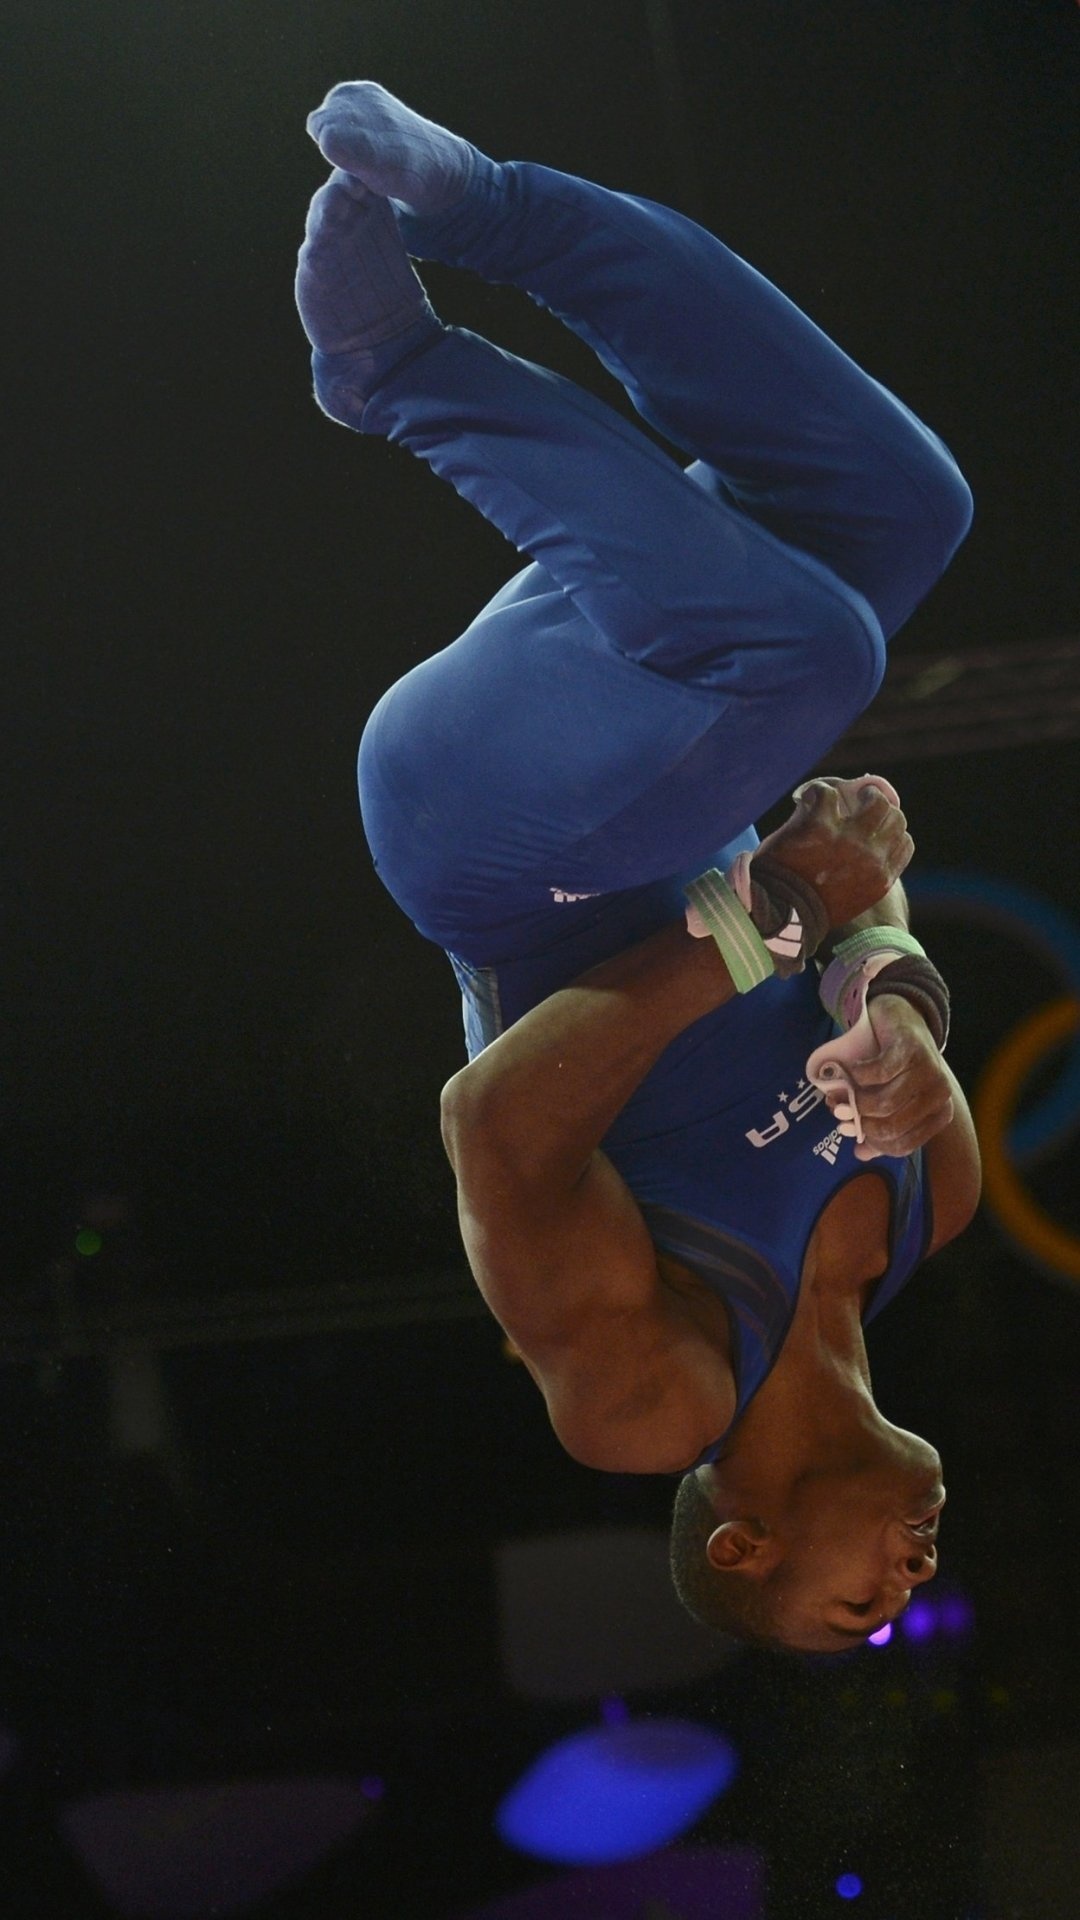 Artistic Gymnastics, Sports showcase, Physical prowess, Athletic performances, 1080x1920 Full HD Phone